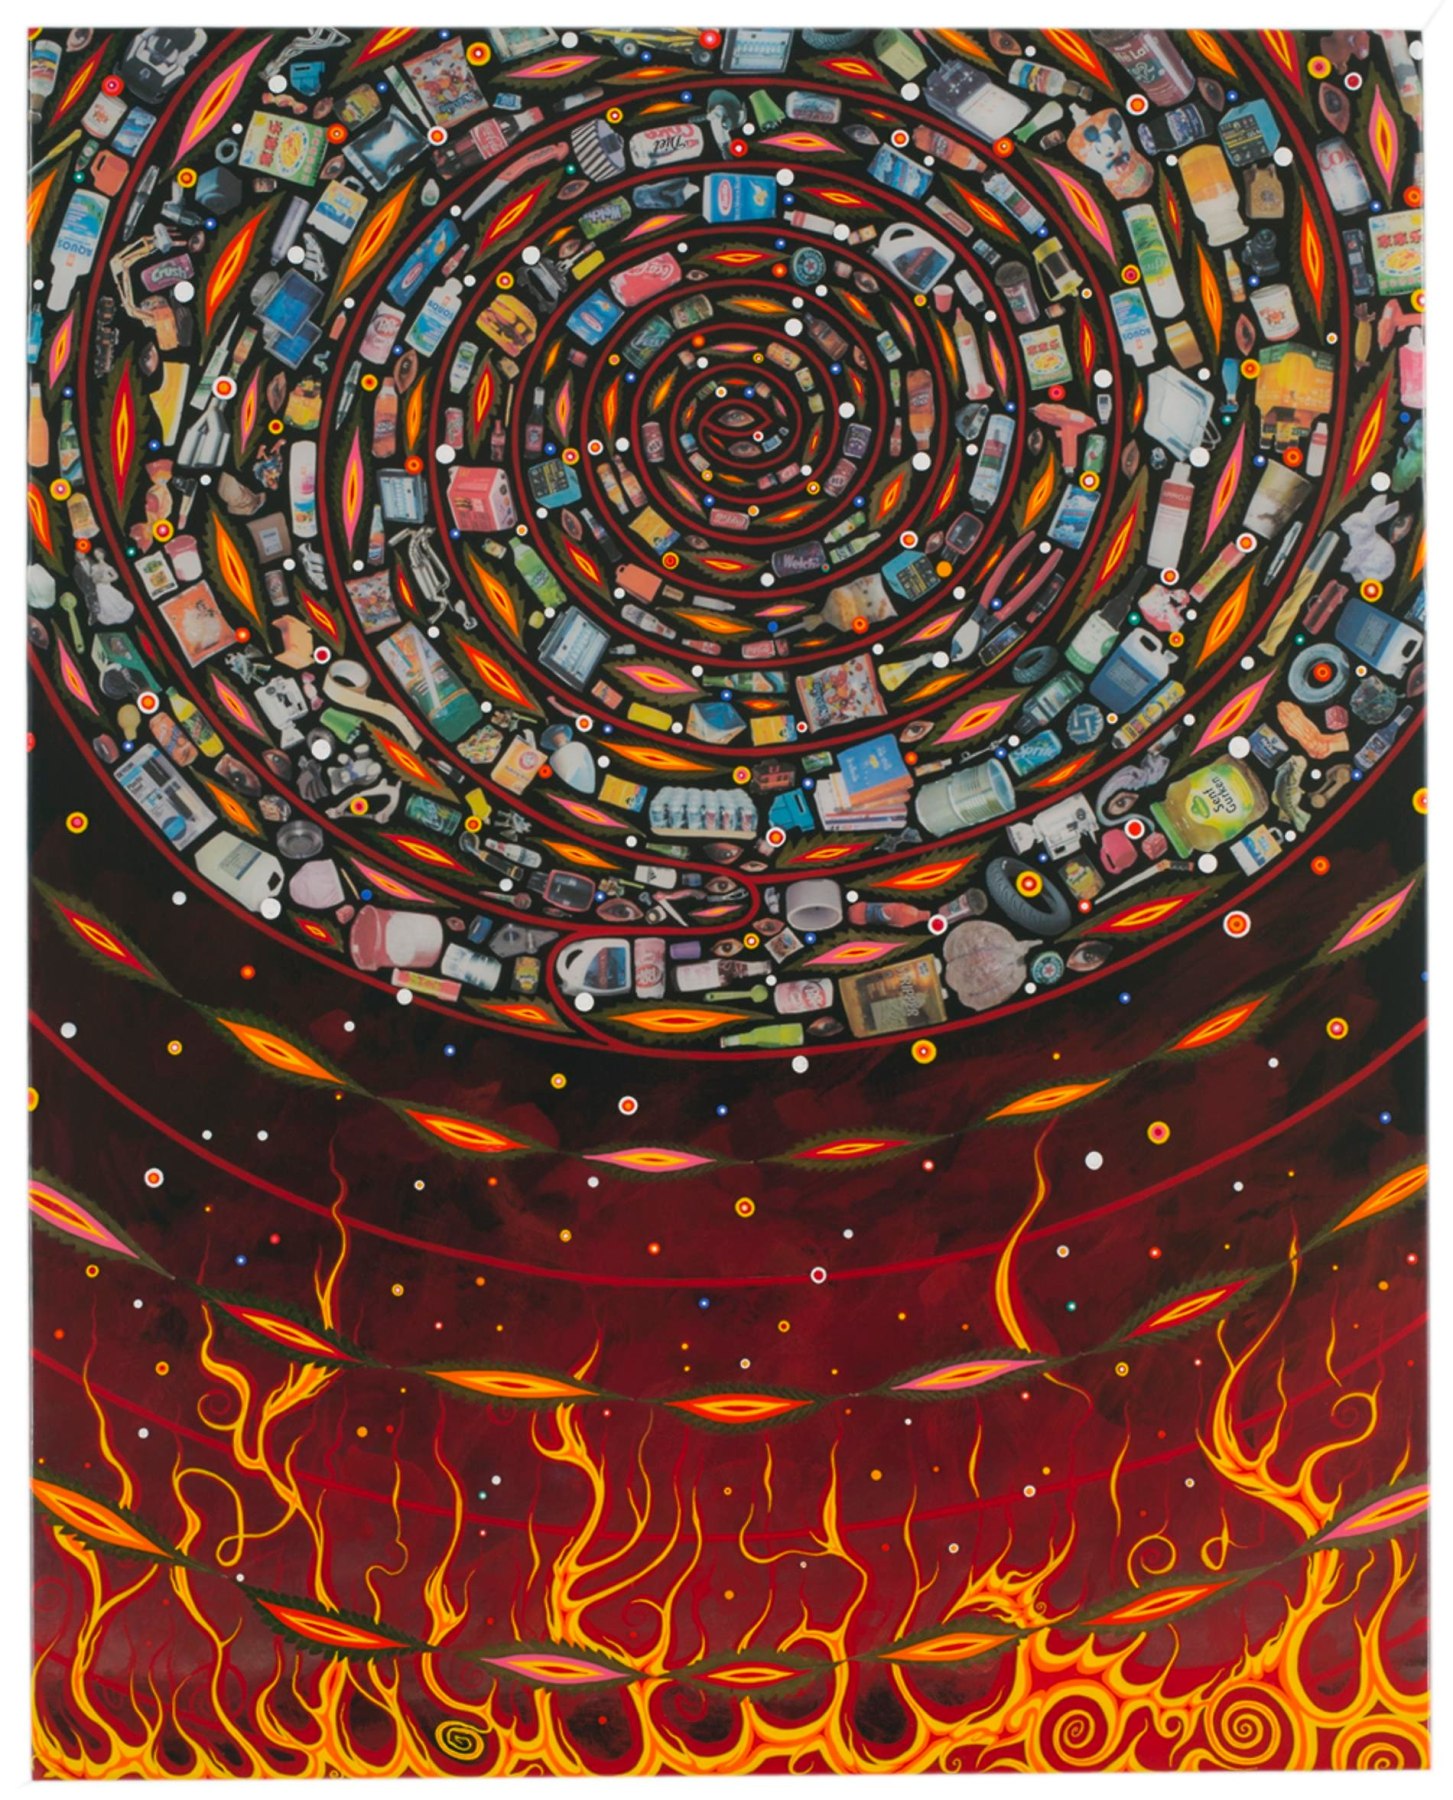 Image of FRED TOMASELLI's After Oct. 16, 2010,&nbsp;2014